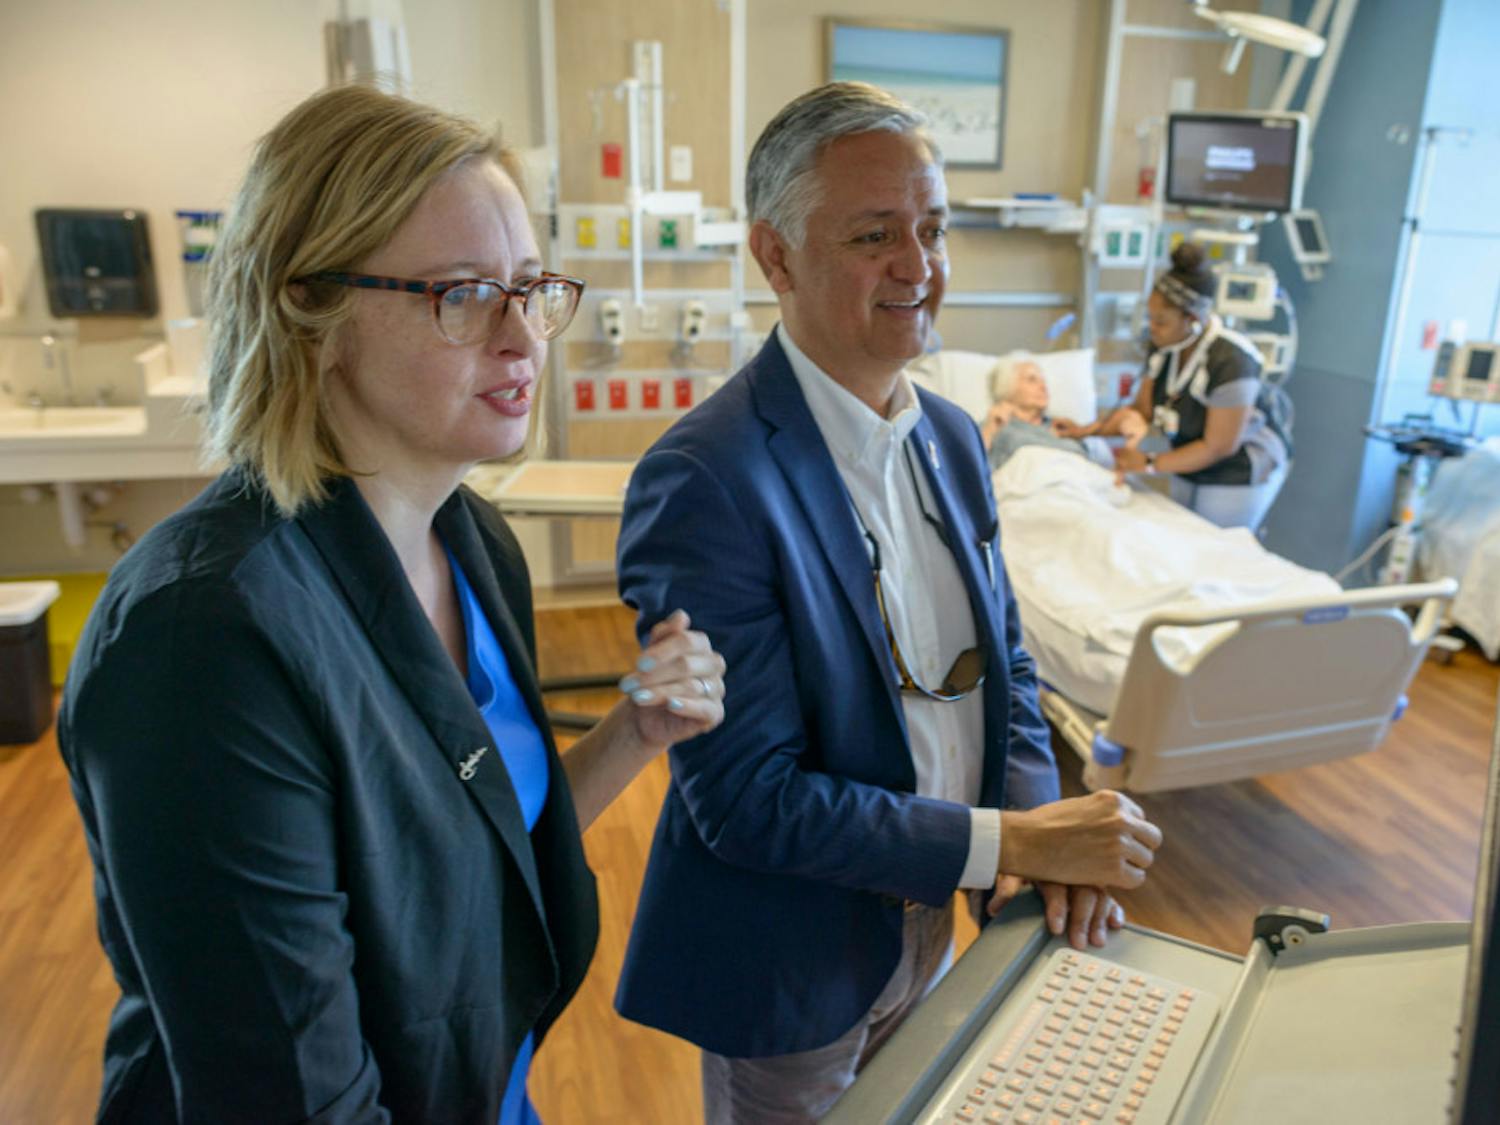 Ragnhildur Bjarnadottir, Ph.D., left, and Robert Lucero, Ph.D., plan to use nurses' notes for their project in improving the safety for hospitalized older adults.